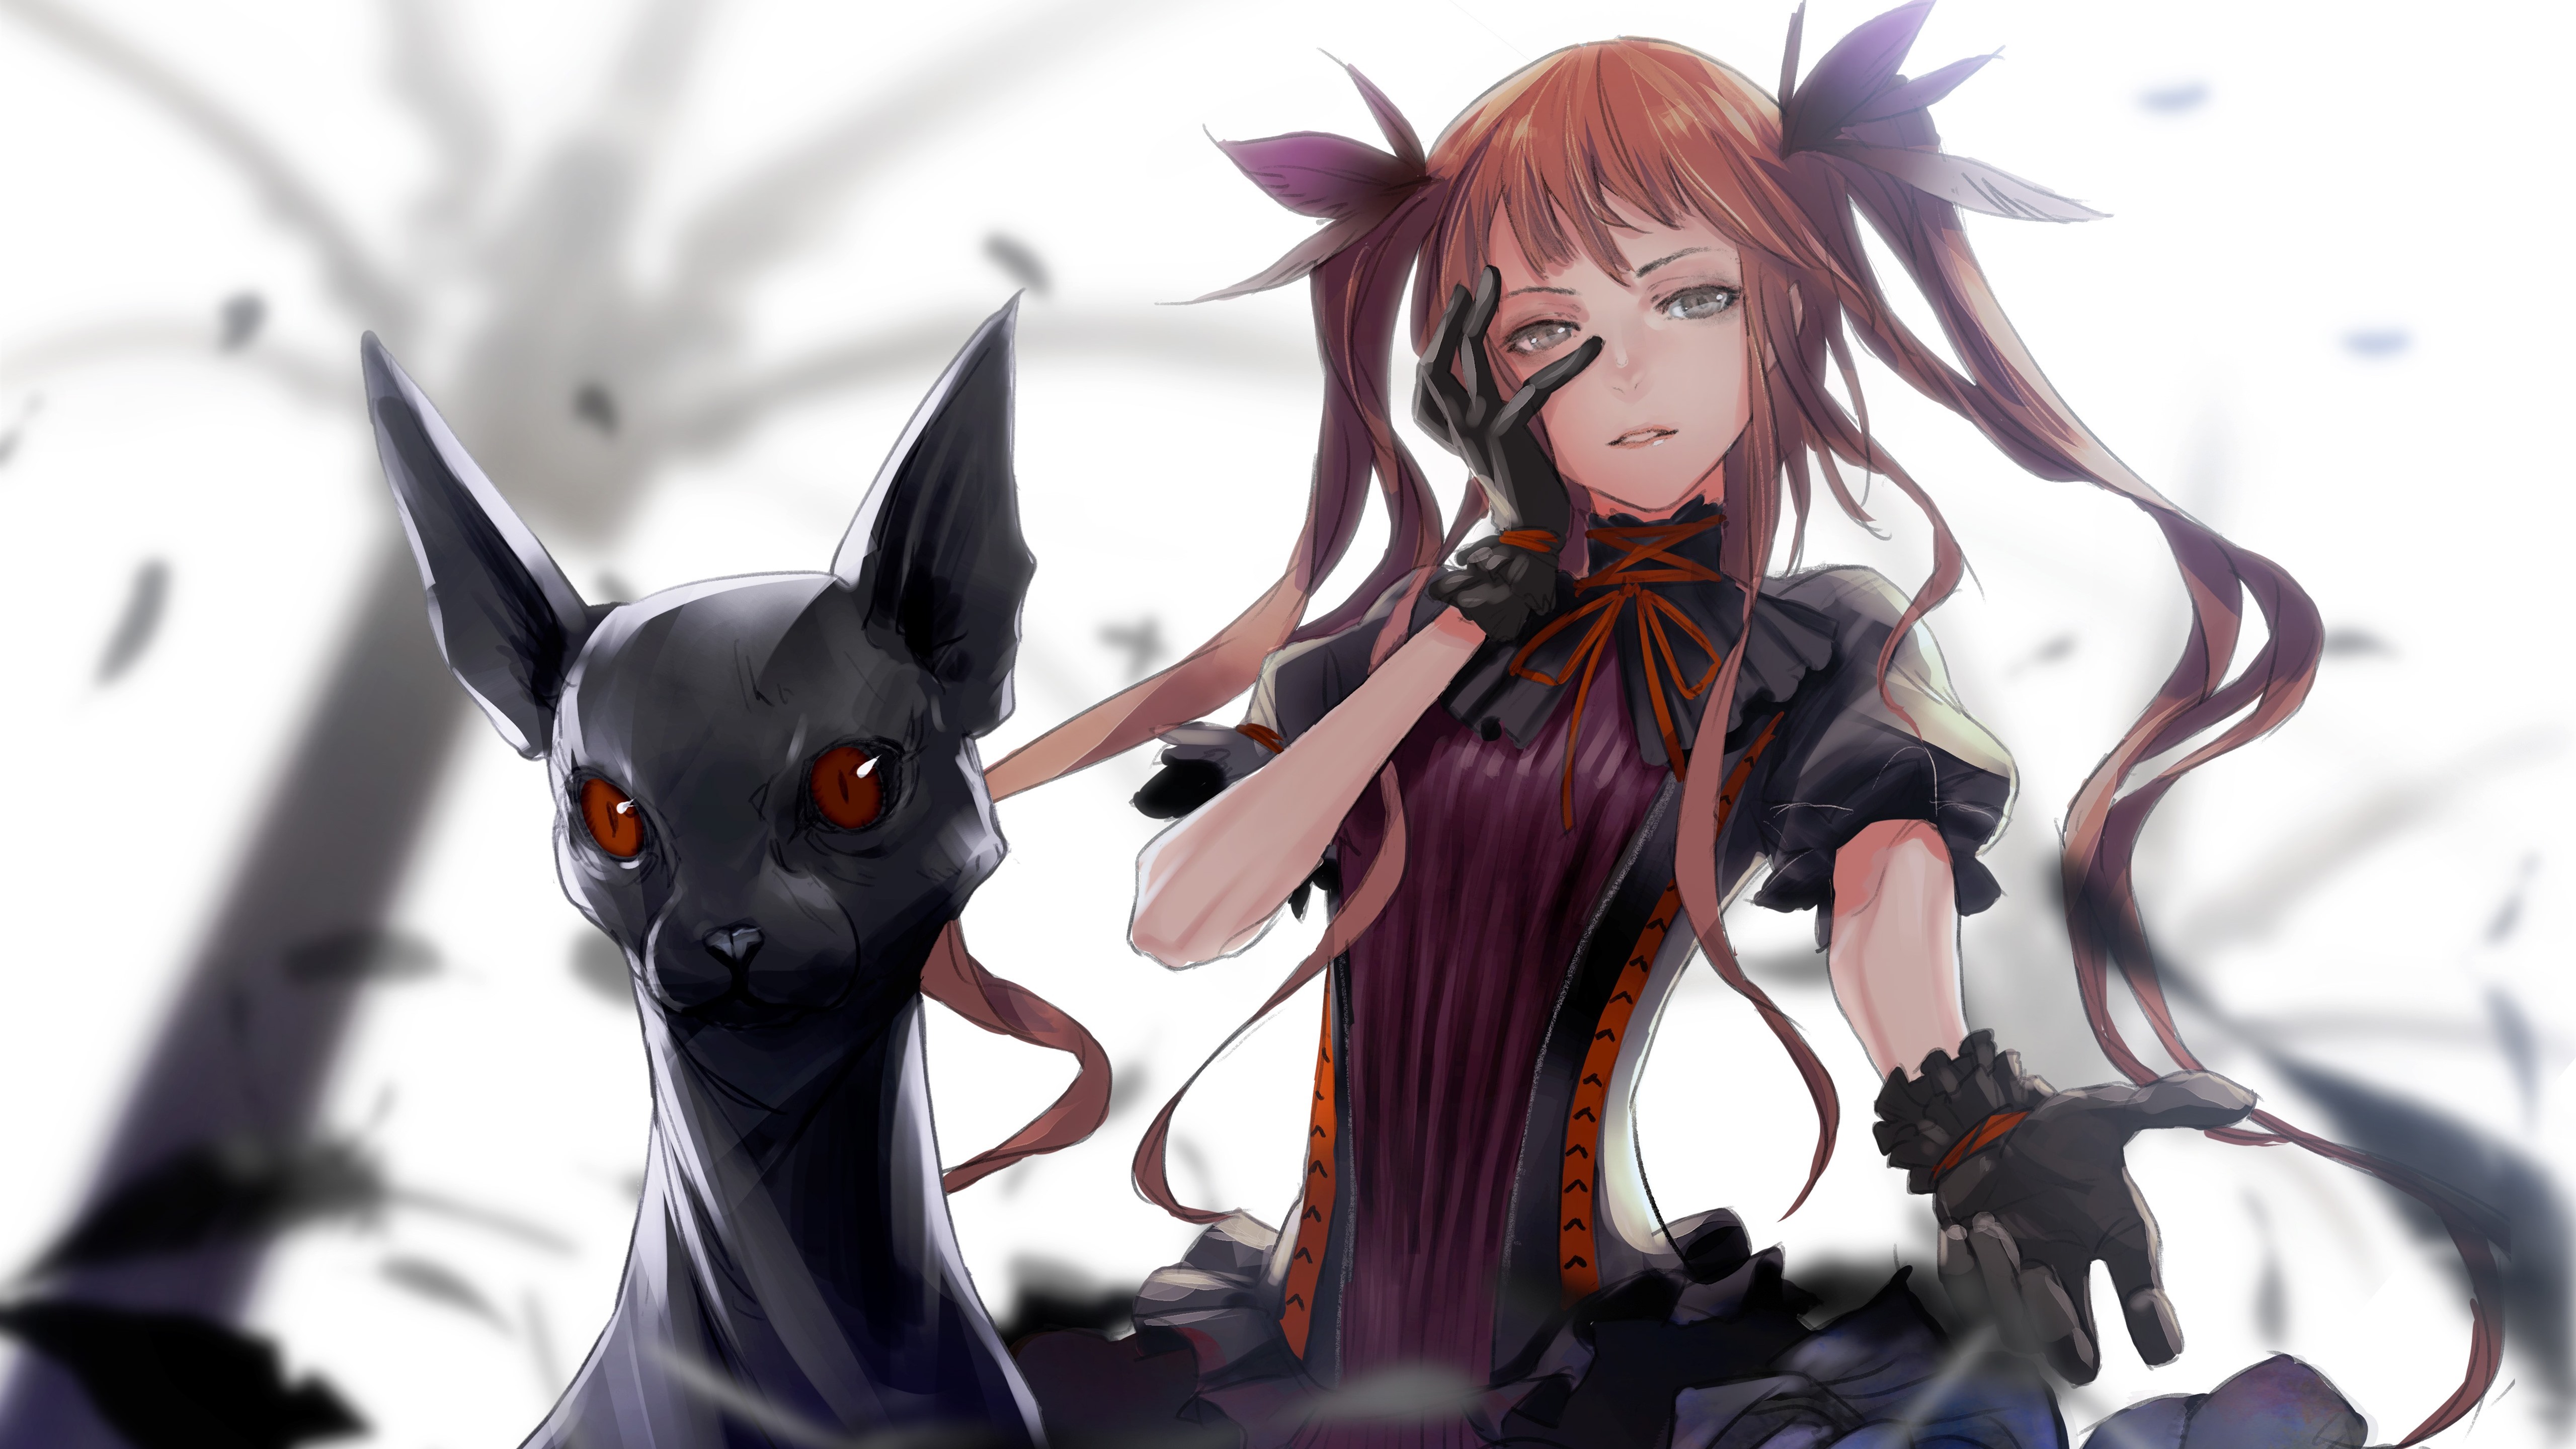 Wallpaper Anime Girl And Cat - Clip Studio Paint Painting - HD Wallpaper 